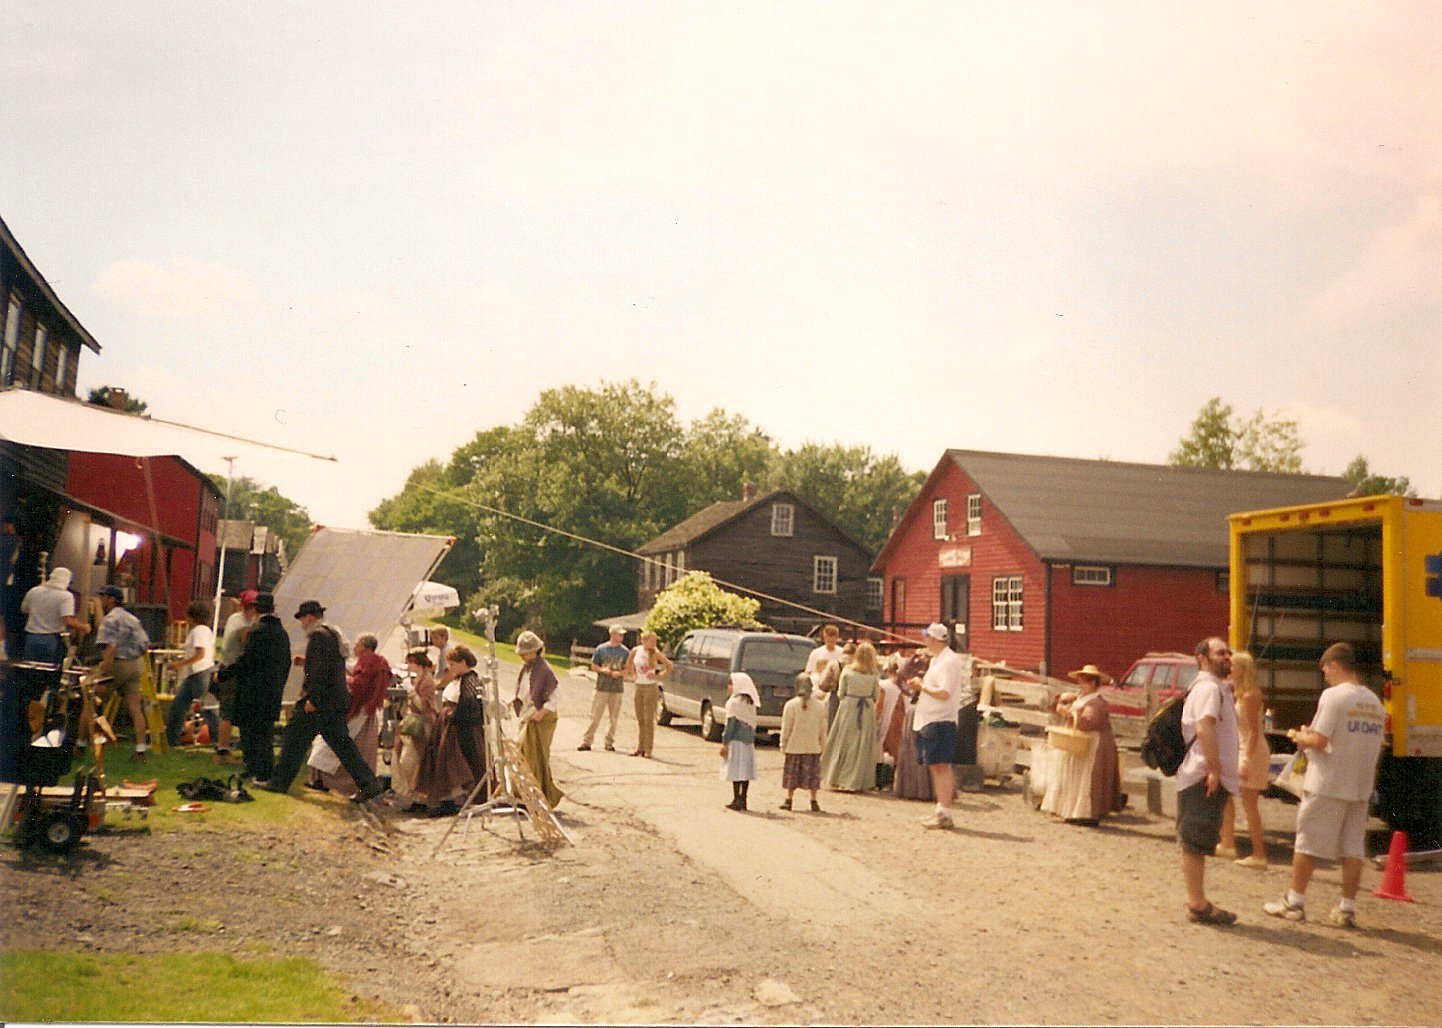 Cast and Crew on location at Eckley Miner's Village in Pennsylvania, while shooting the United Studio's film, Stories from the Mines.